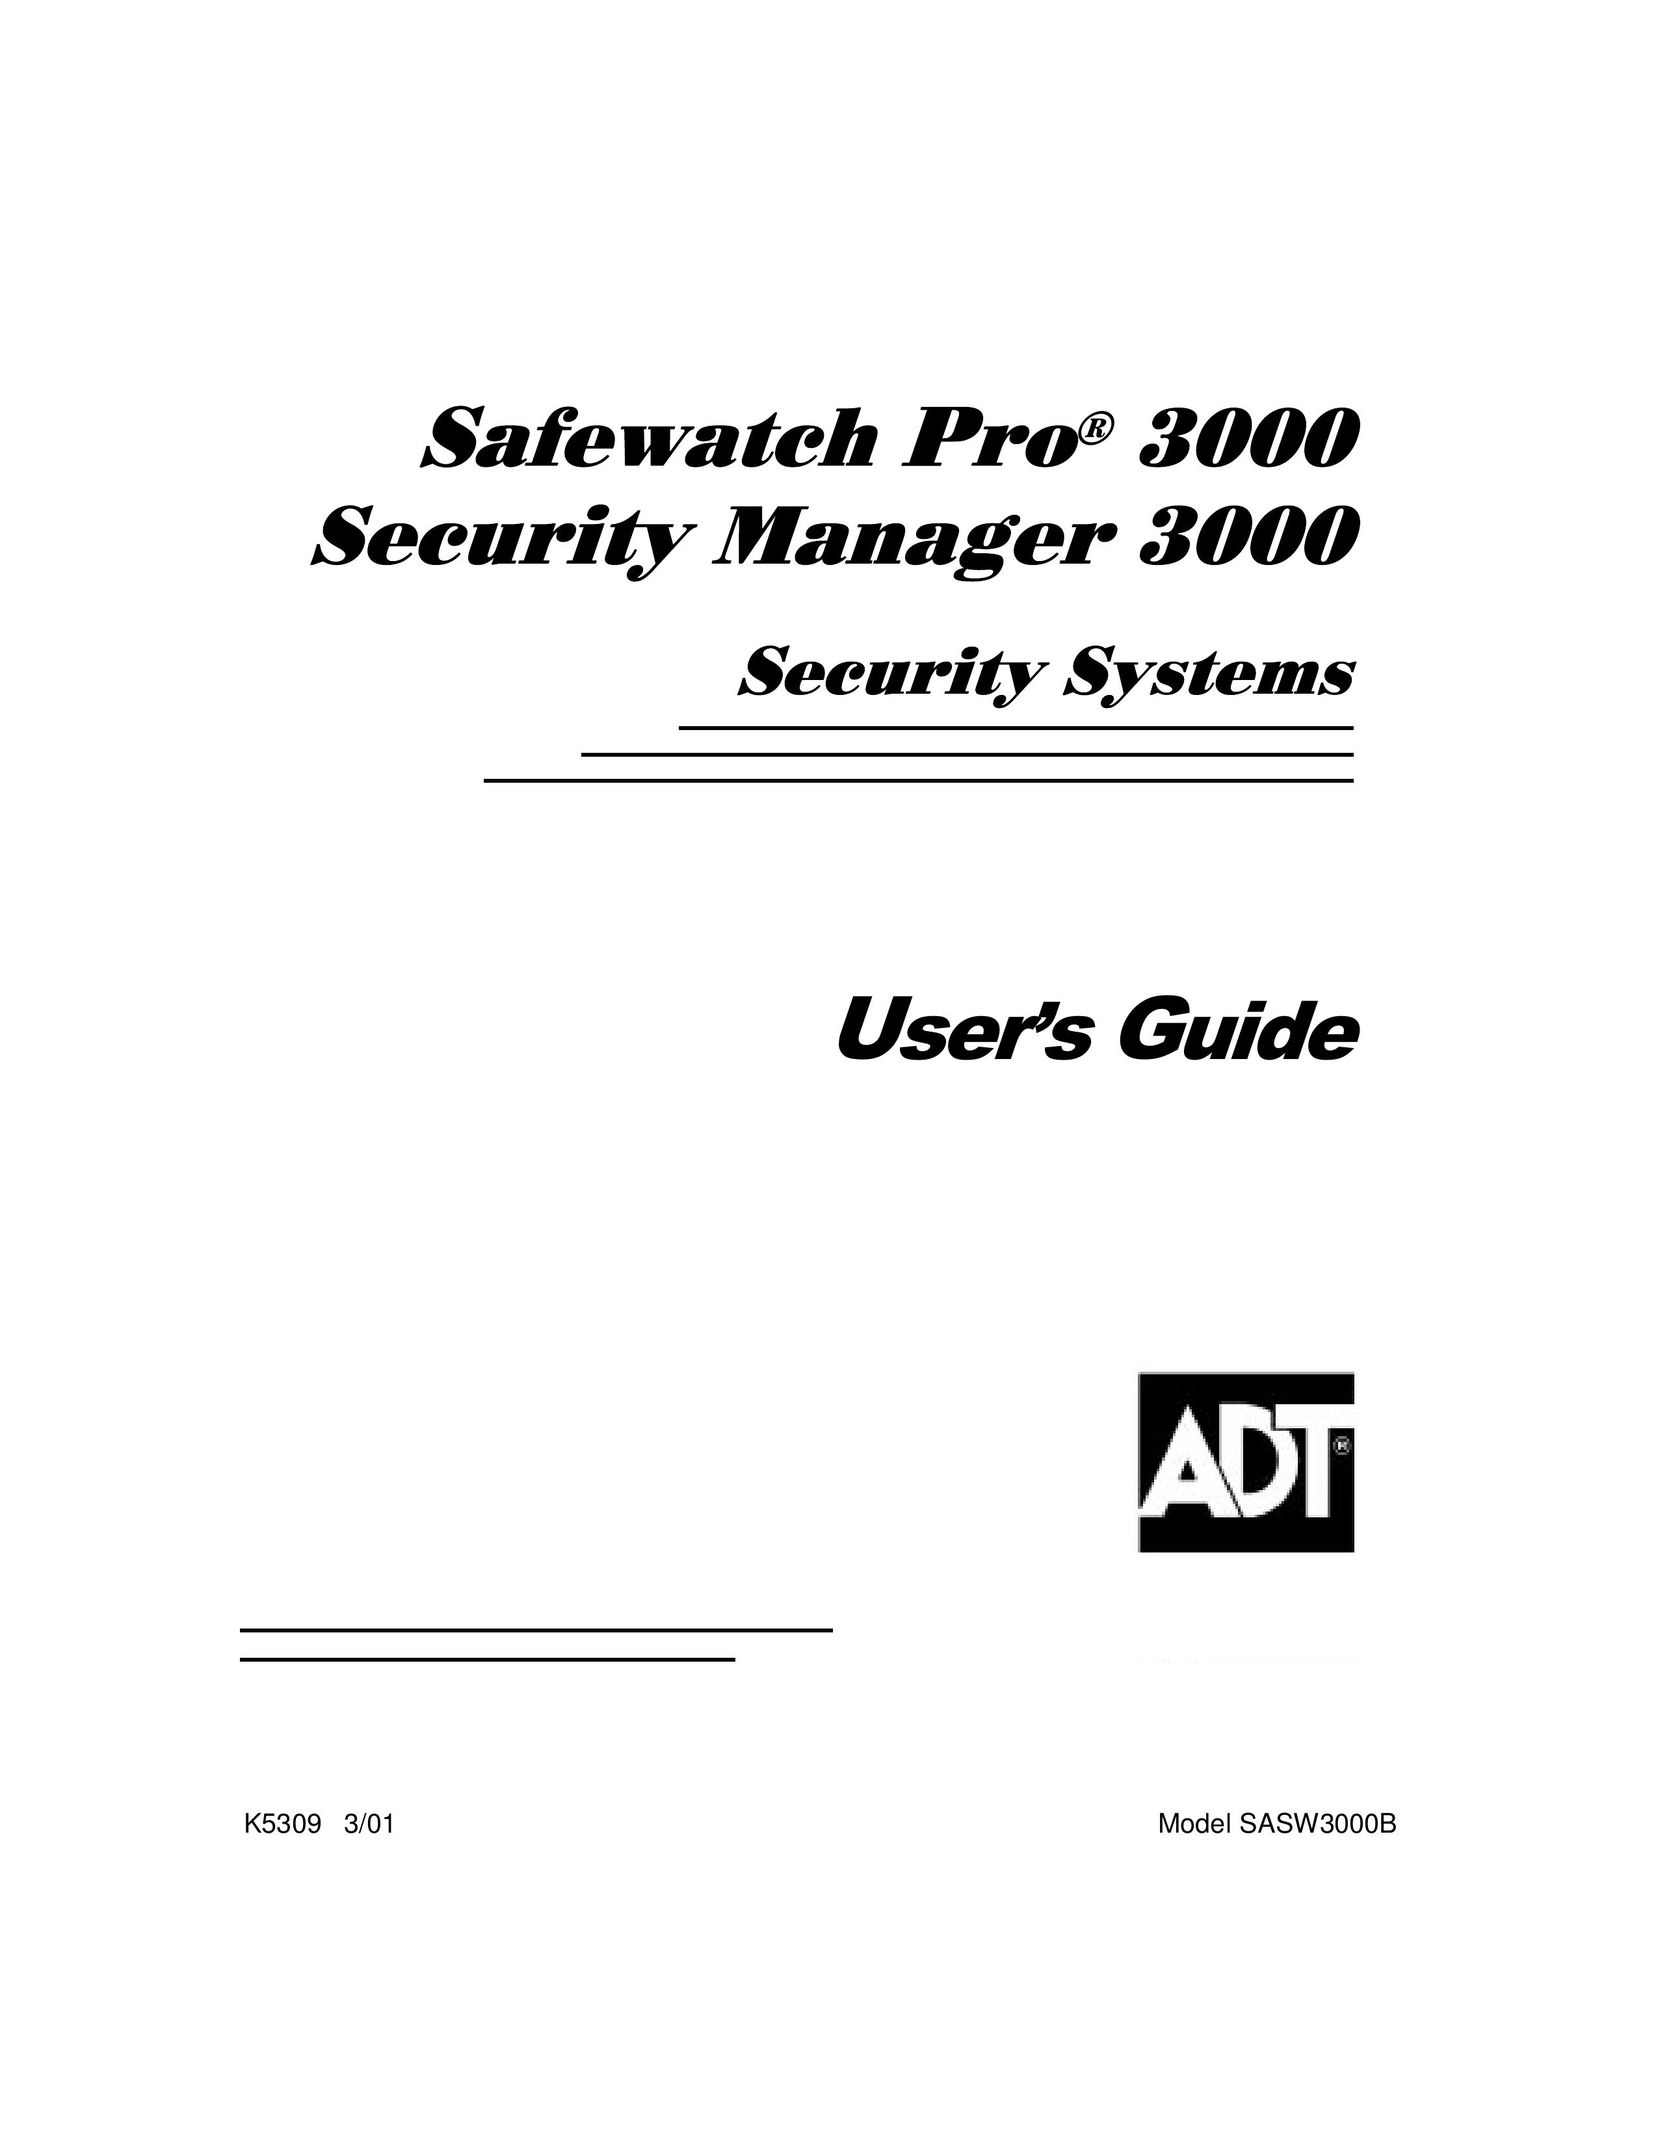 ADT Security Services 3000 Home Security System User Manual